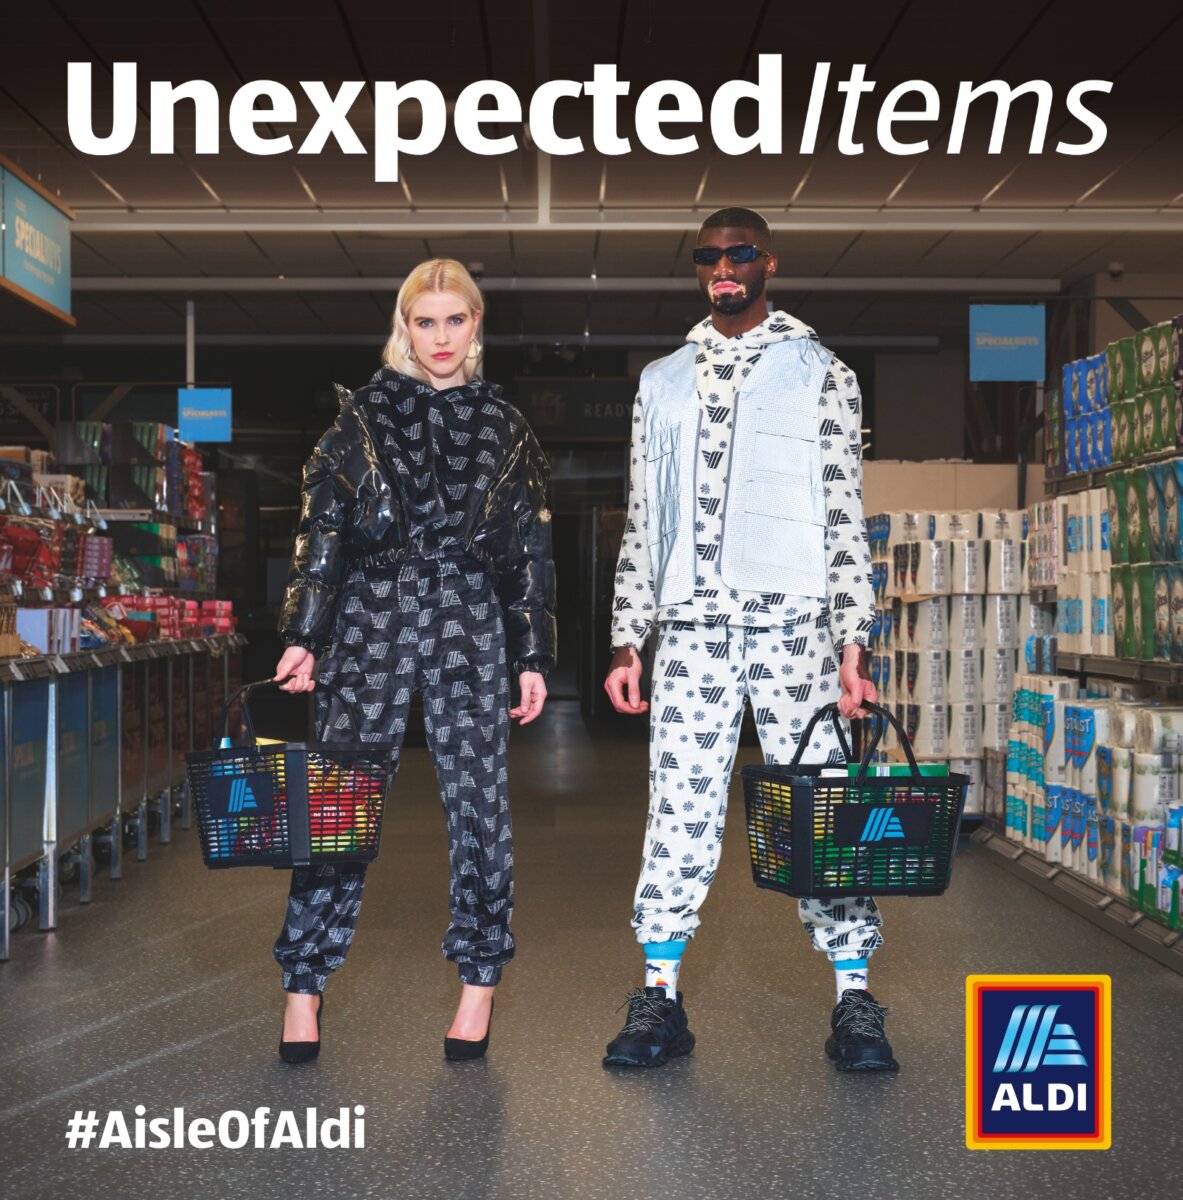 ALDI Unexpected Items Campaign. Shot by Ryan Edy - CRXSS